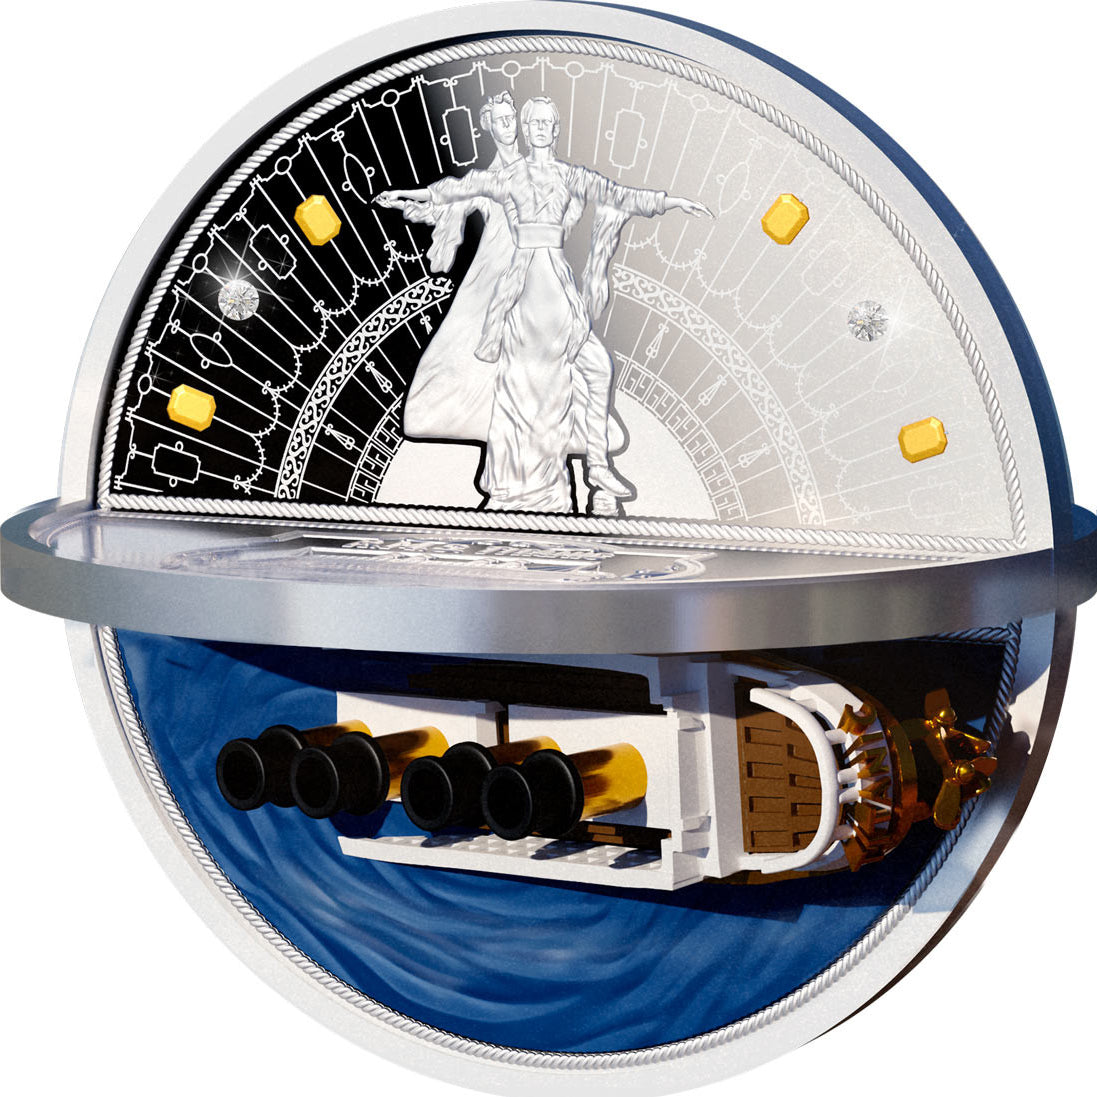 2022 Niue $5 Silver Proof Coin - Titanic - 110th Anniversary of Titanic Sinking